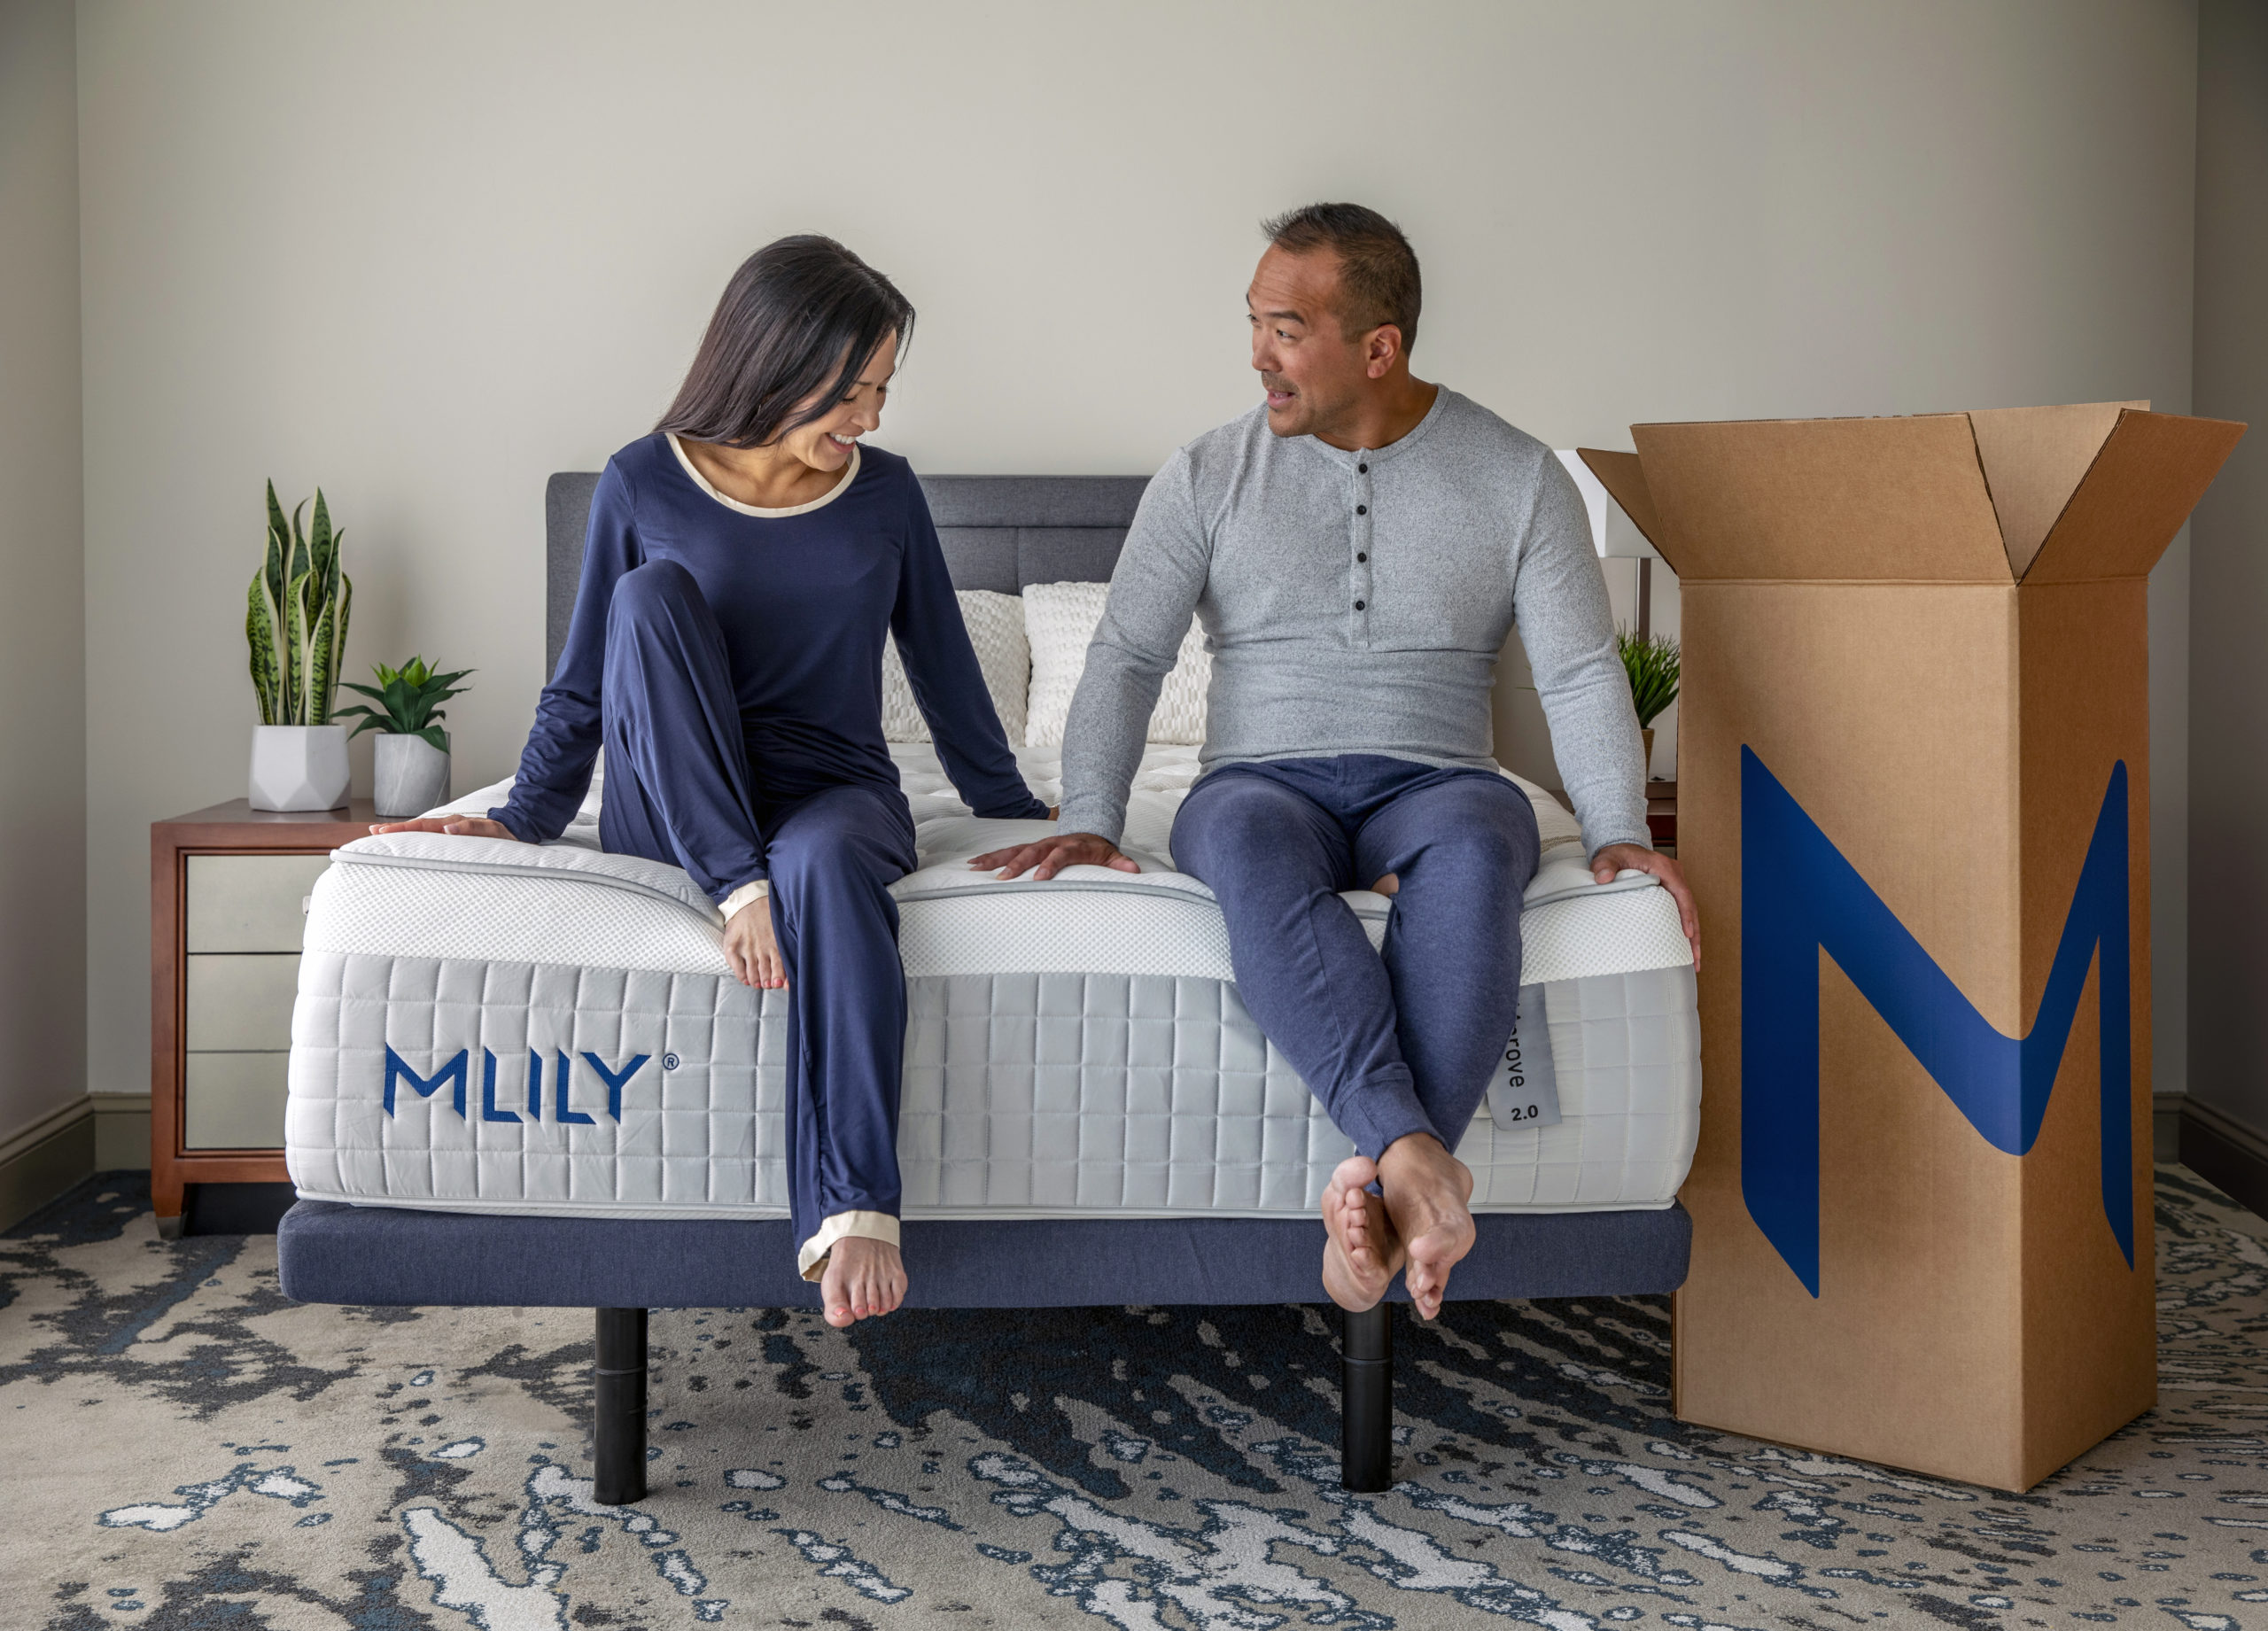 Man and woman sitting on mattress labeled MLILY on bed frame with large cardboard box next to bed.